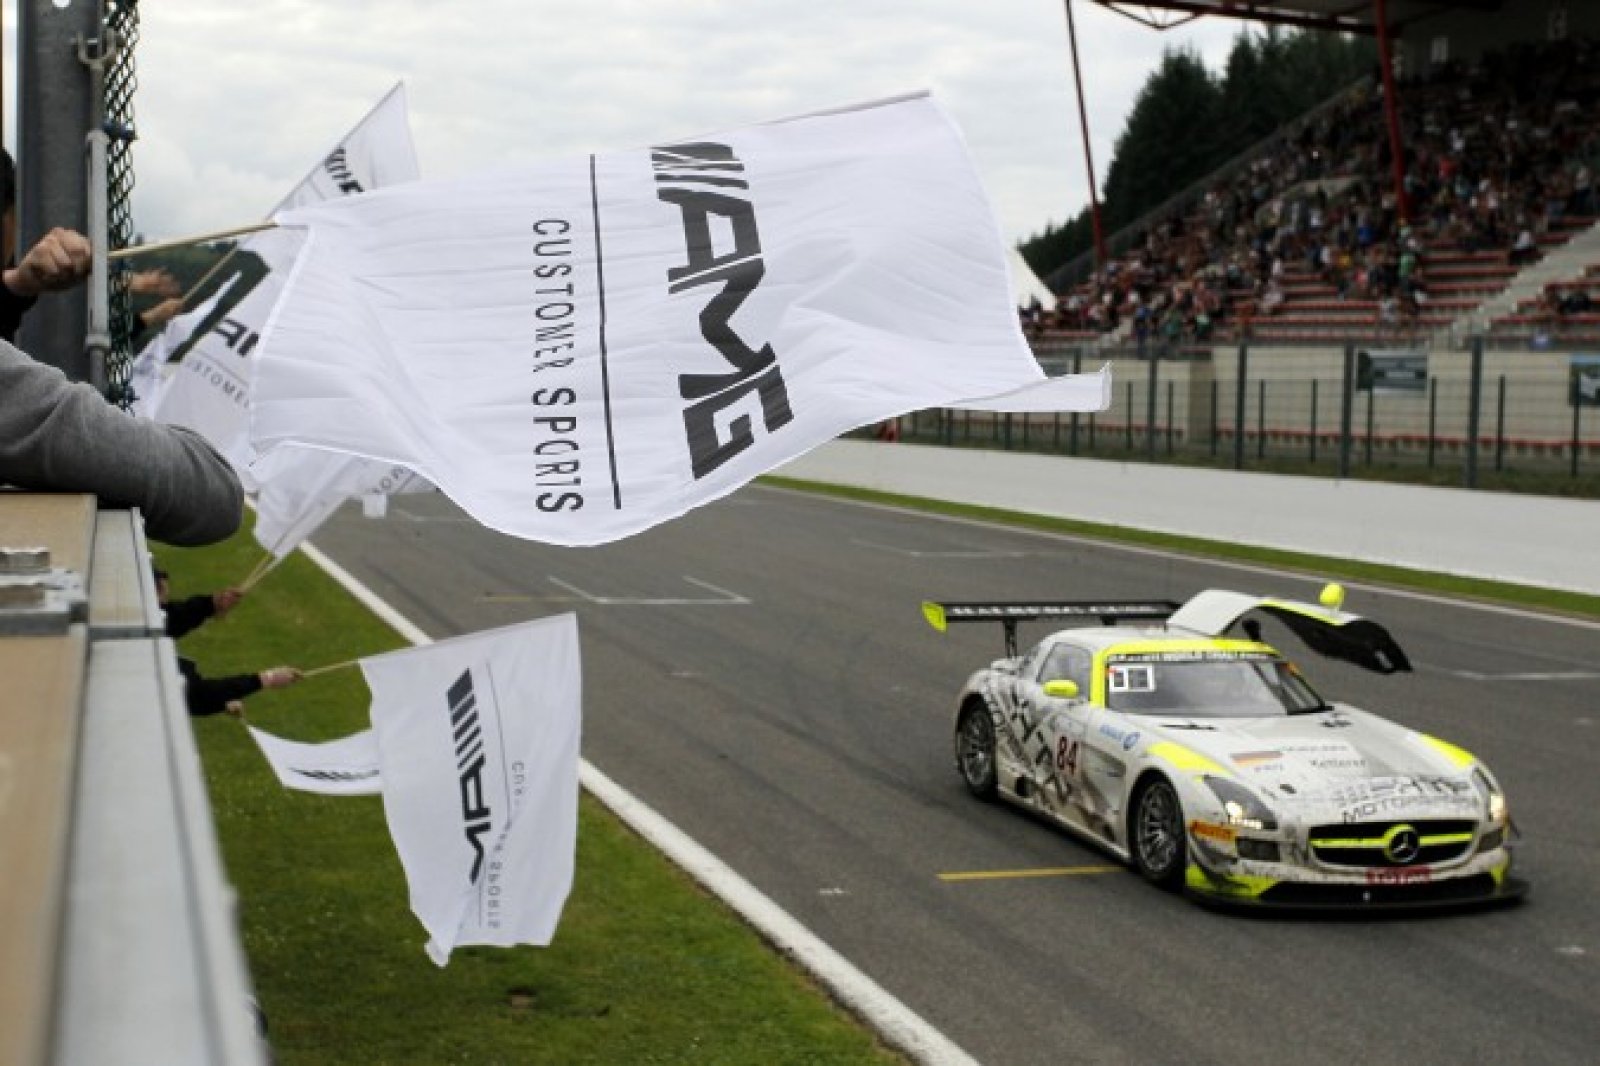 HTP Mercedes outmuscles Manthey Porsche for victory in the 65th Total 24 Hours of Spa